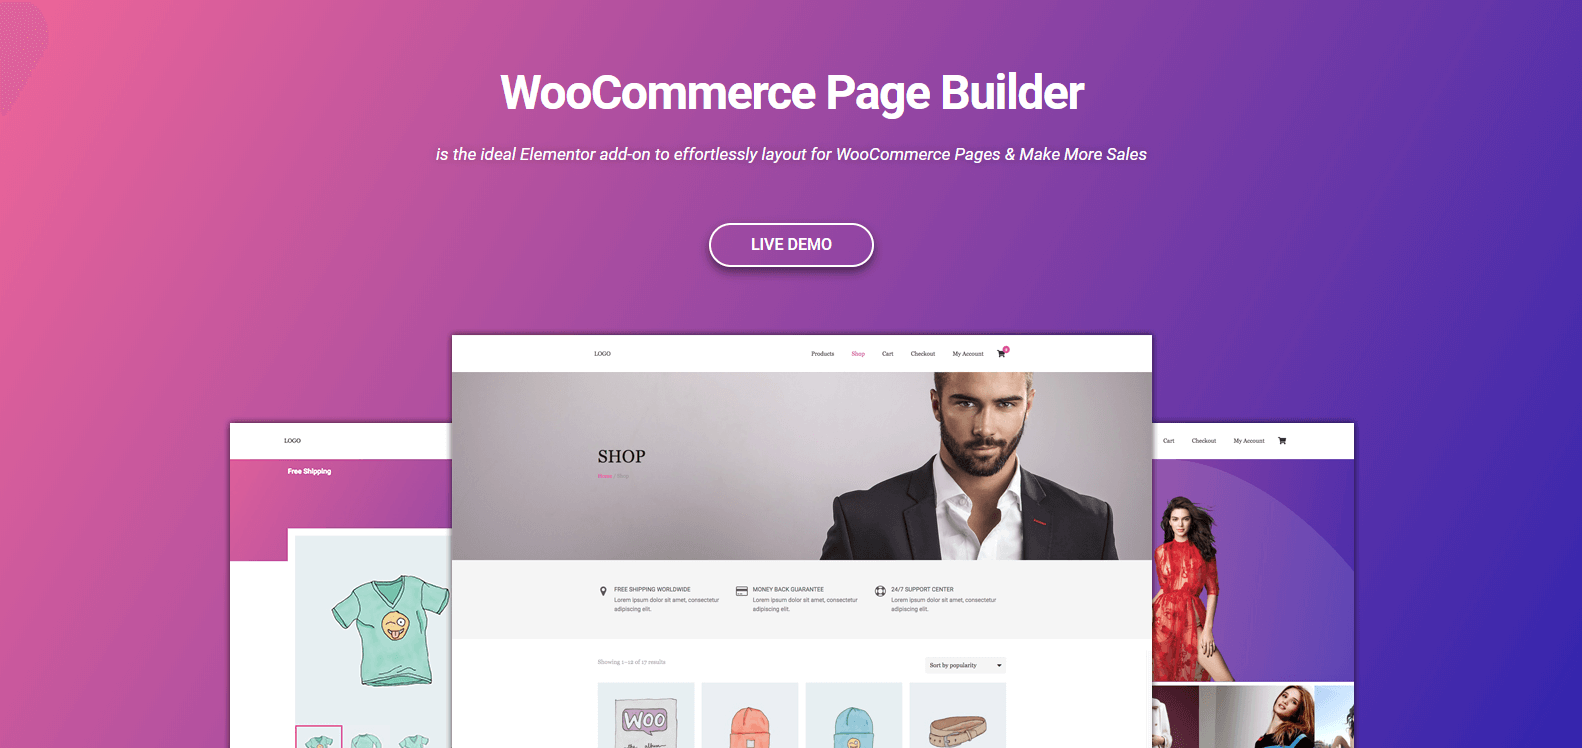 How to Build Shop Pages for Your eCommerce Store